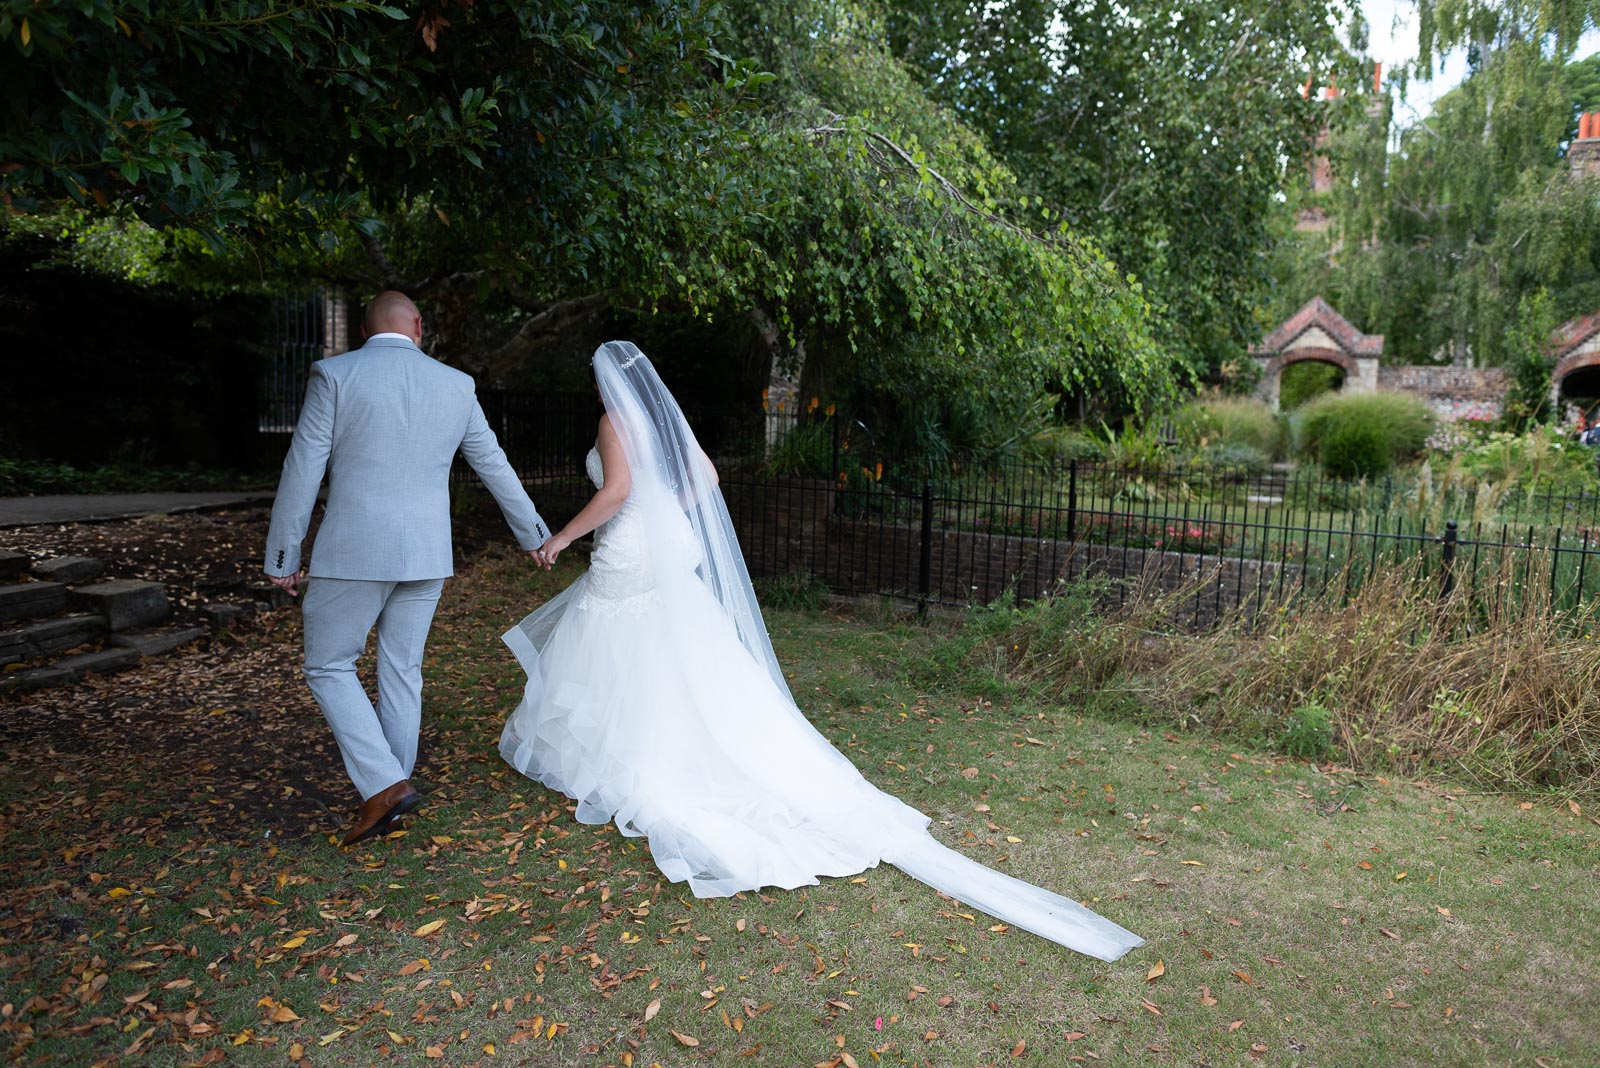 Billy and Soraya walk through the grounds at Southover Grange, Lewes after their wedding.